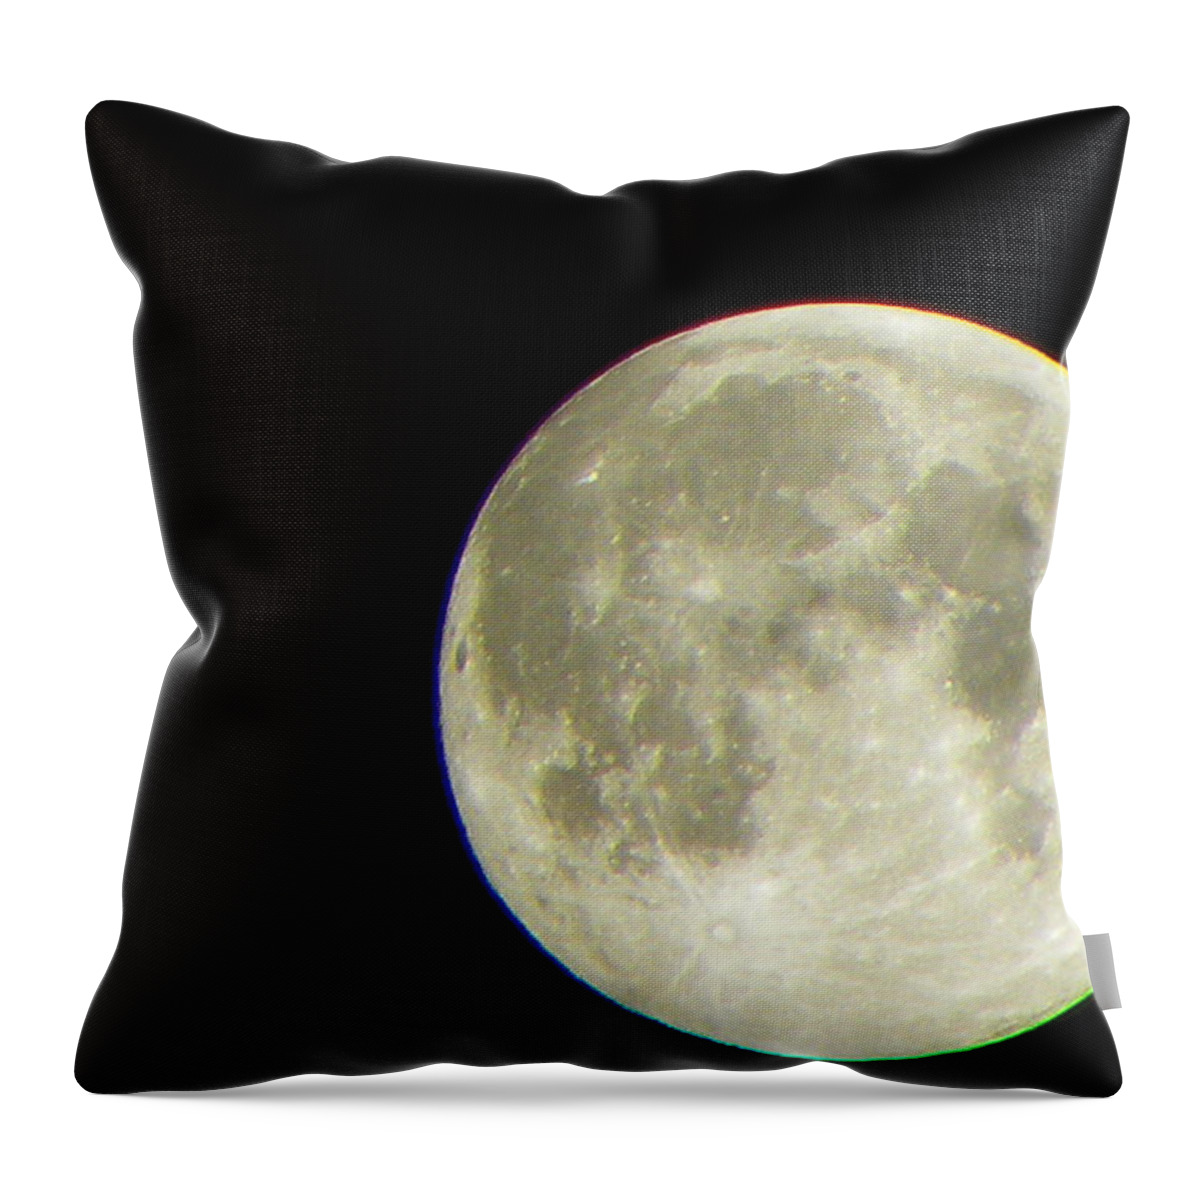 Moon Throw Pillow featuring the photograph Kissimee Prairie Full Moon by Christopher Mercer